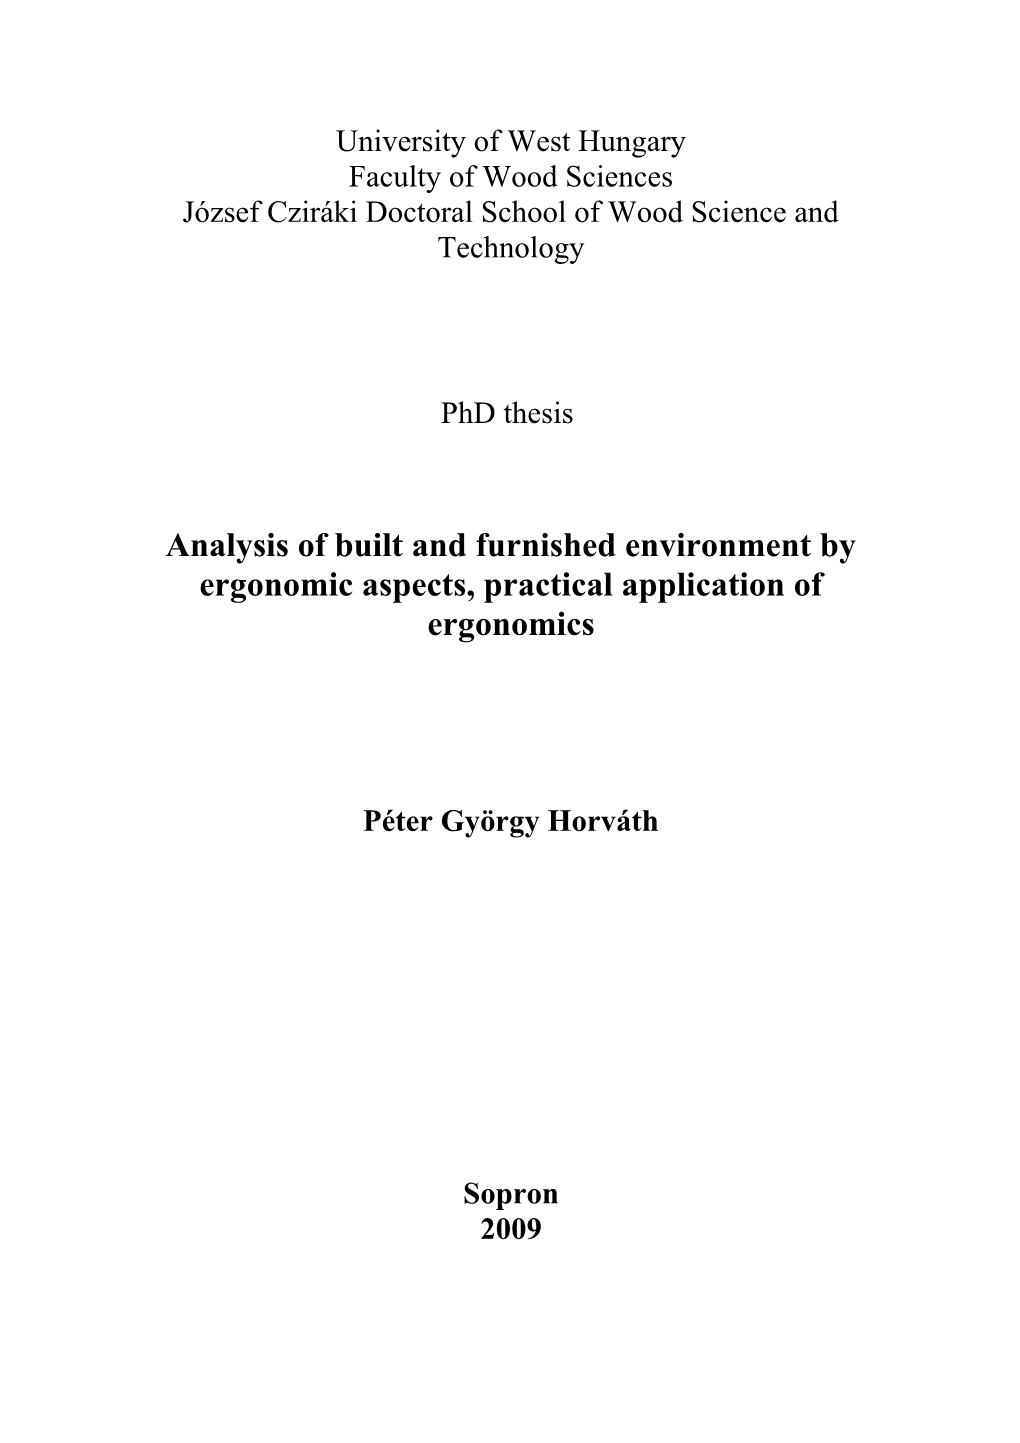 Analysis of Built and Furnished Environment by Ergonomic Aspects, Practical Application